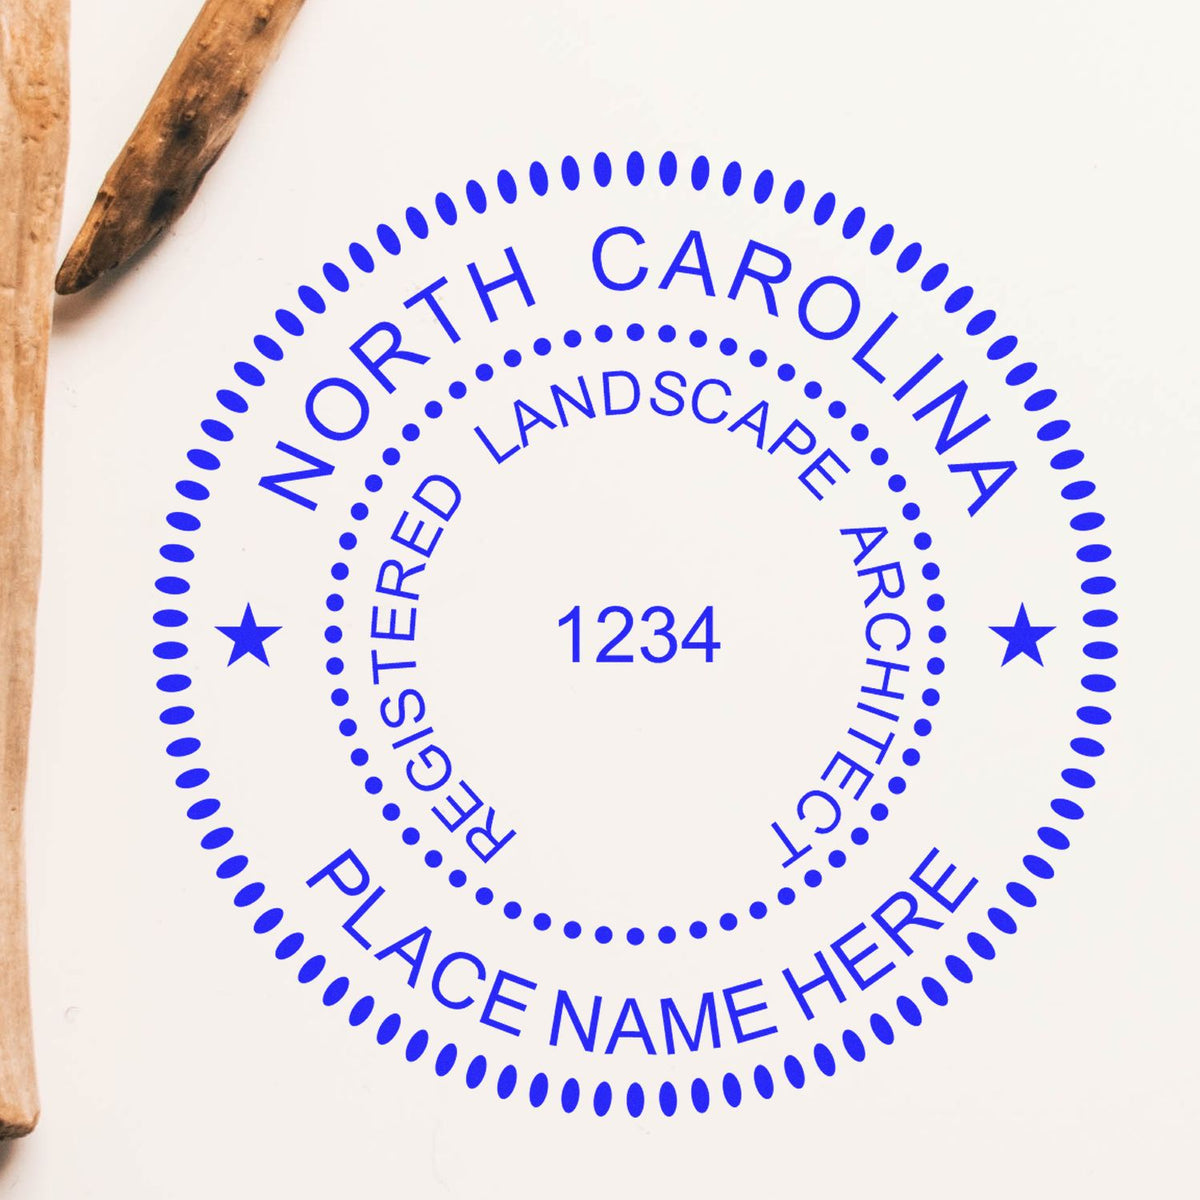 The Slim Pre-Inked North Carolina Landscape Architect Seal Stamp stamp impression comes to life with a crisp, detailed photo on paper - showcasing true professional quality.